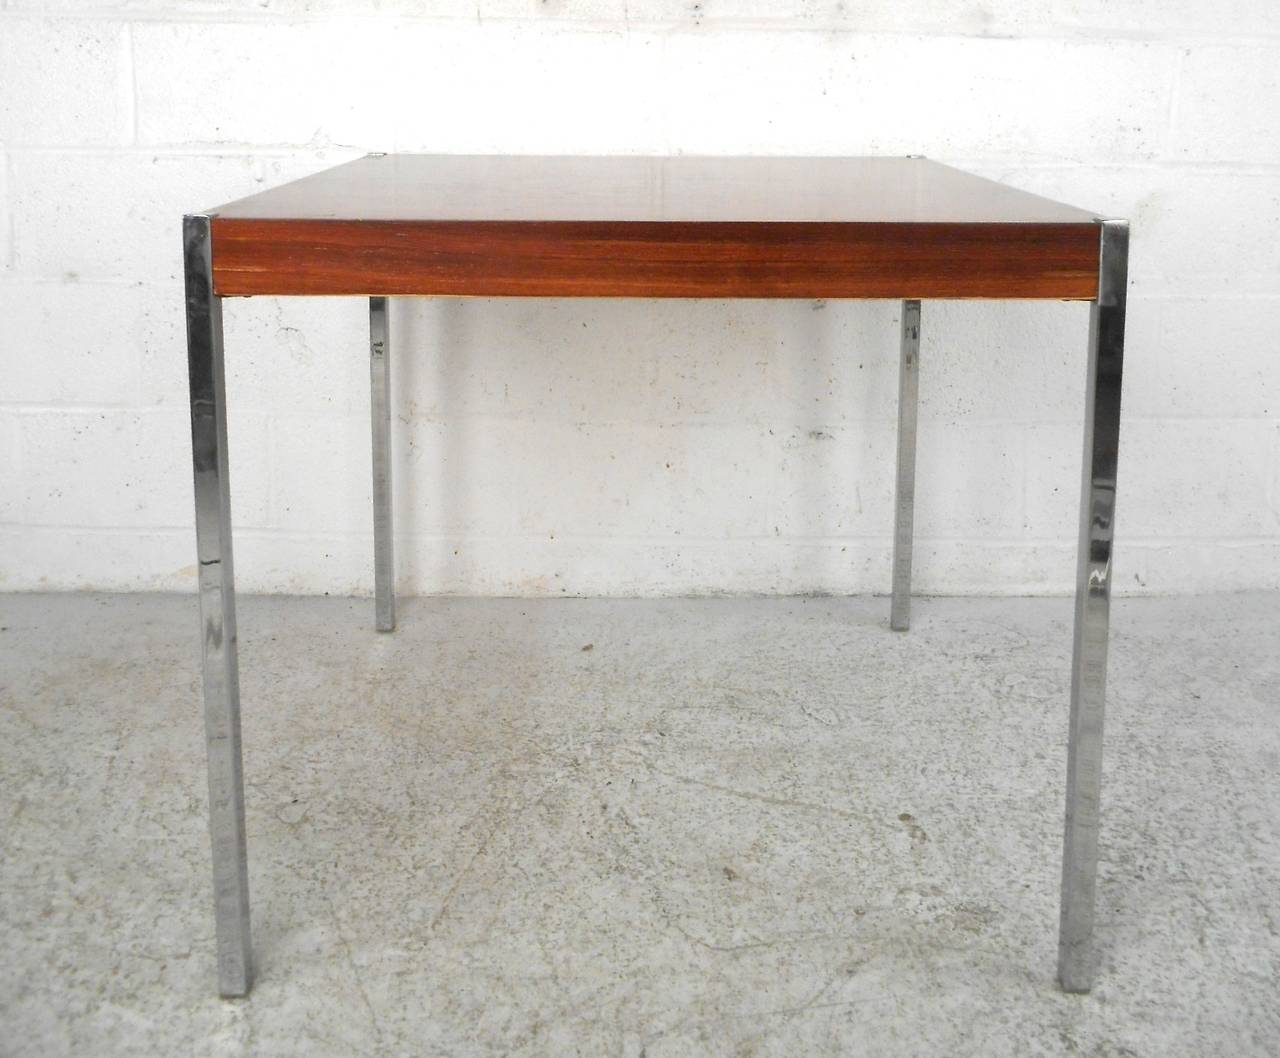 This rosewood top table sits sturdily on chrome legs, and makes a wonderful and versatile table for any setting. Please confirm item location (NY or NJ).